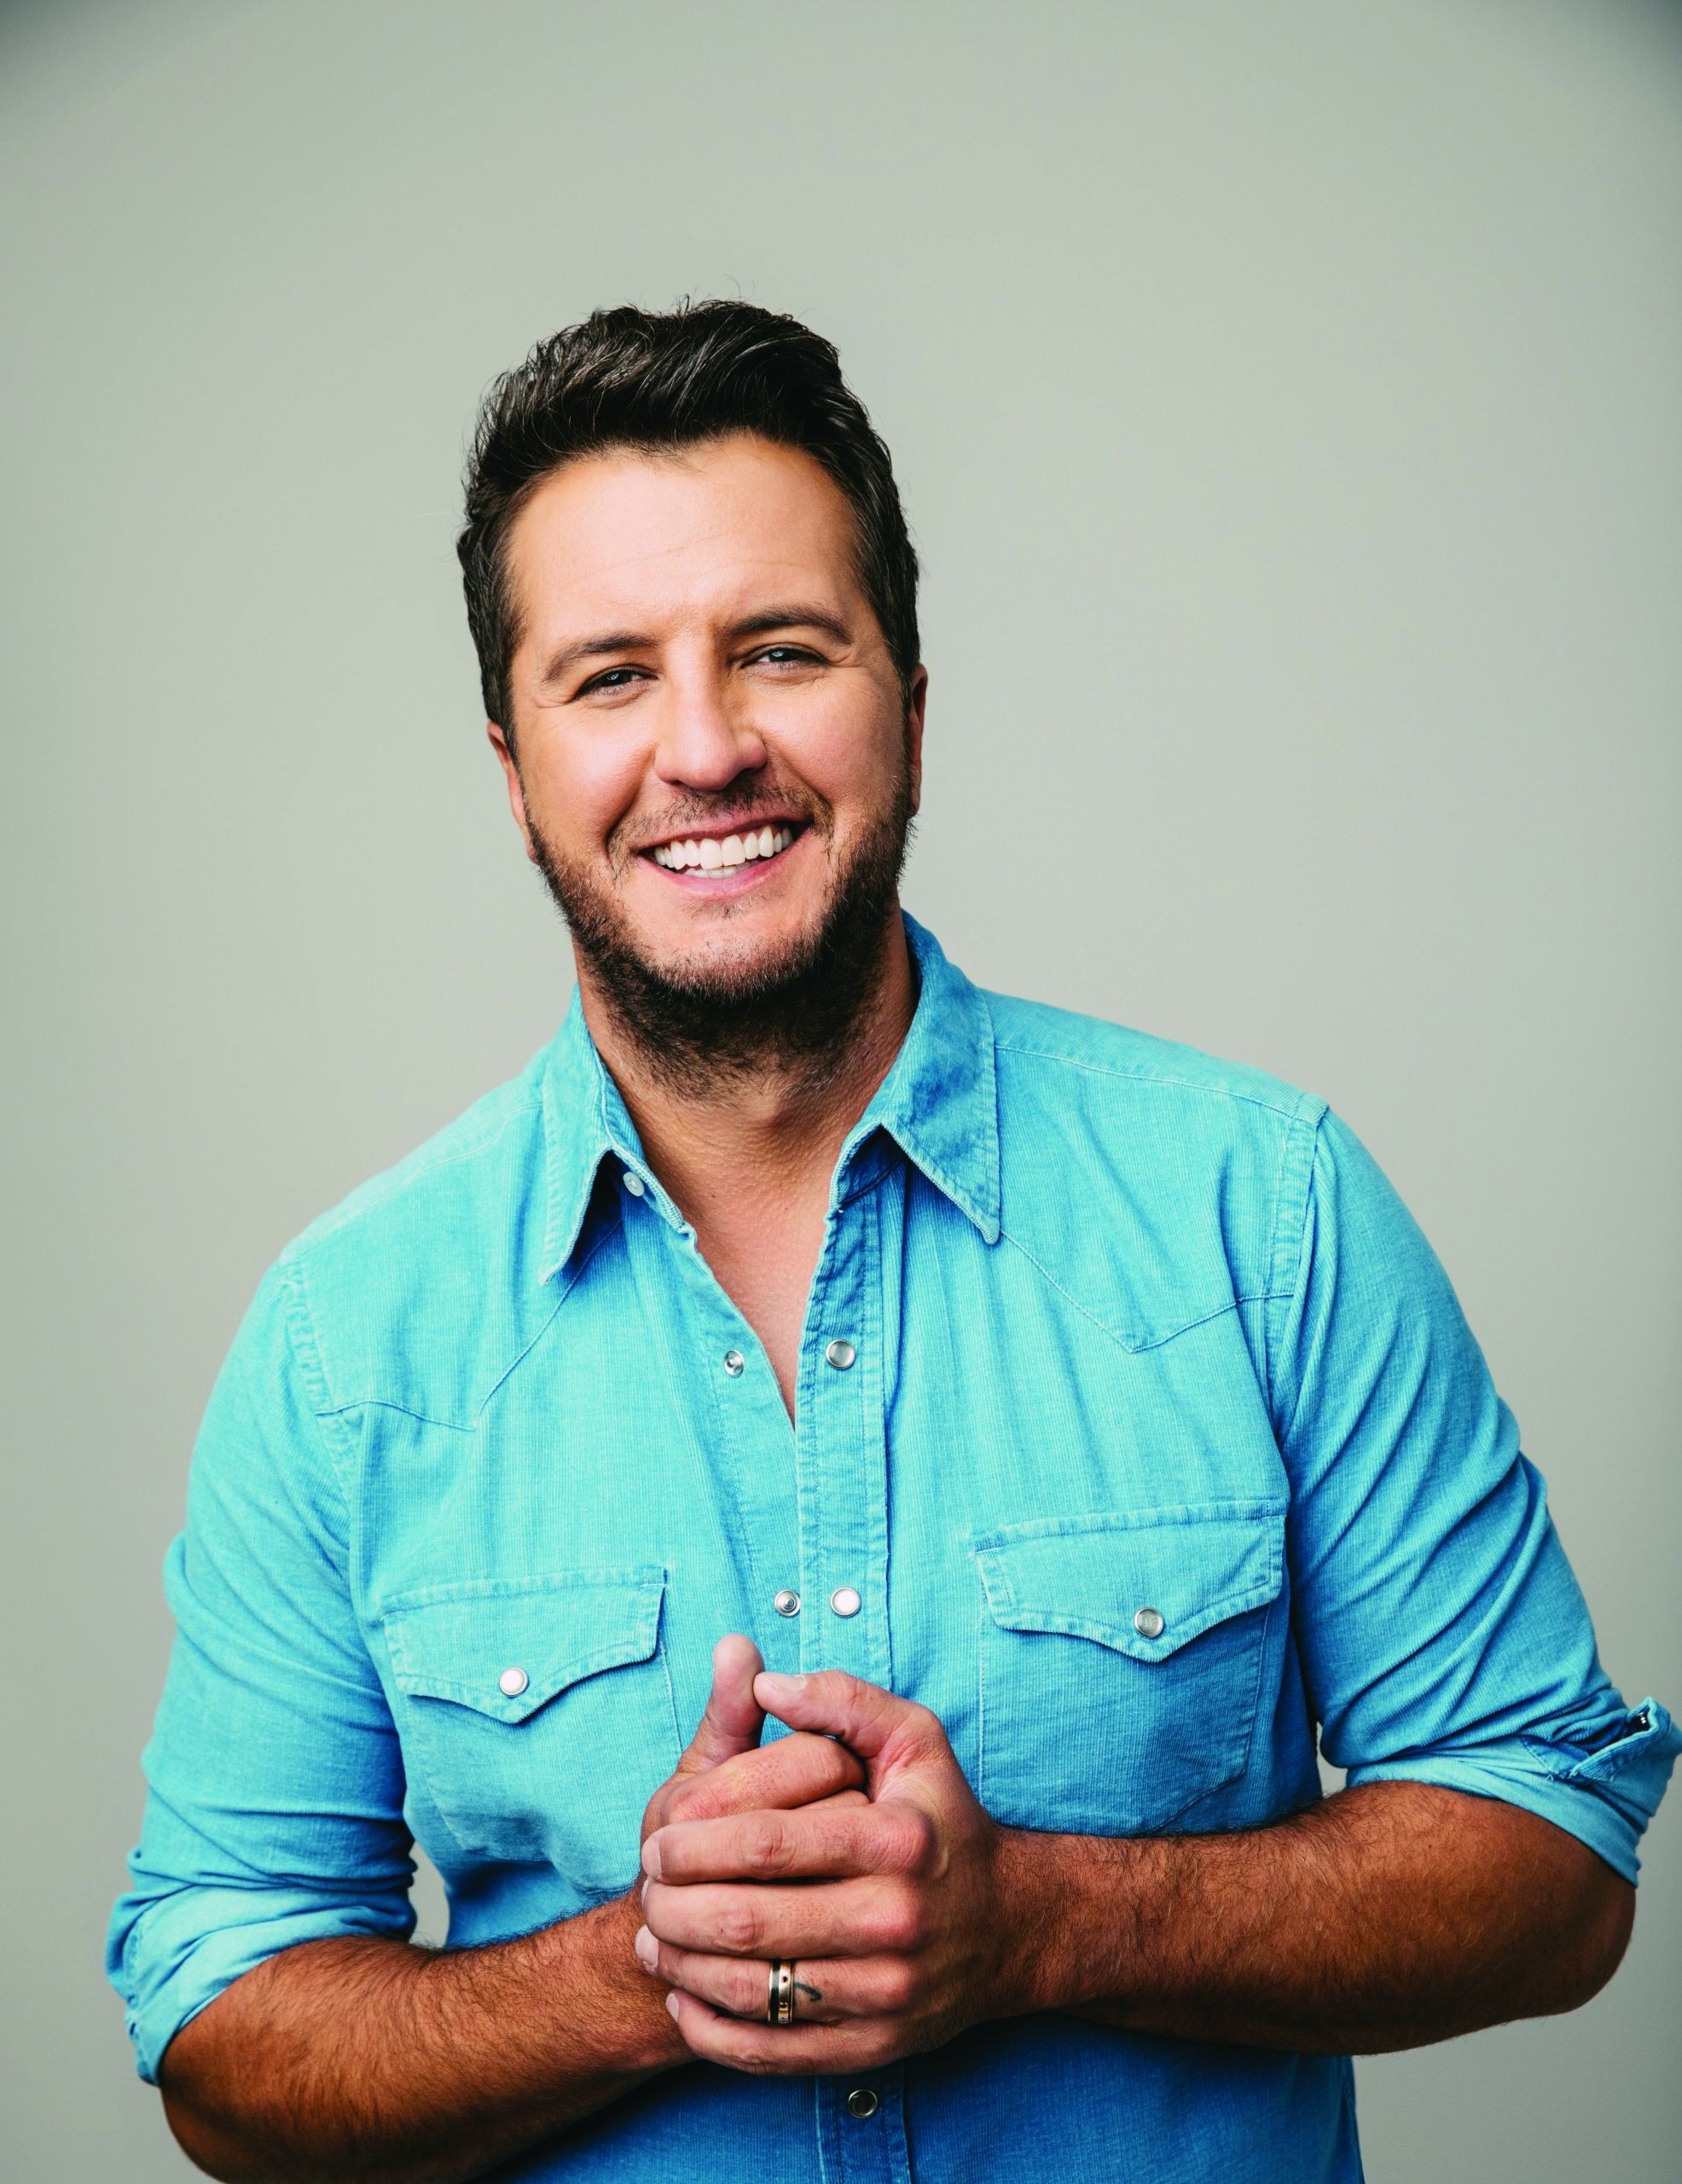 Watch: Luke Bryan’s BORN HERE LIVE HERE DIE HERE Deluxe Edition out Friday- TV Appearances Planned